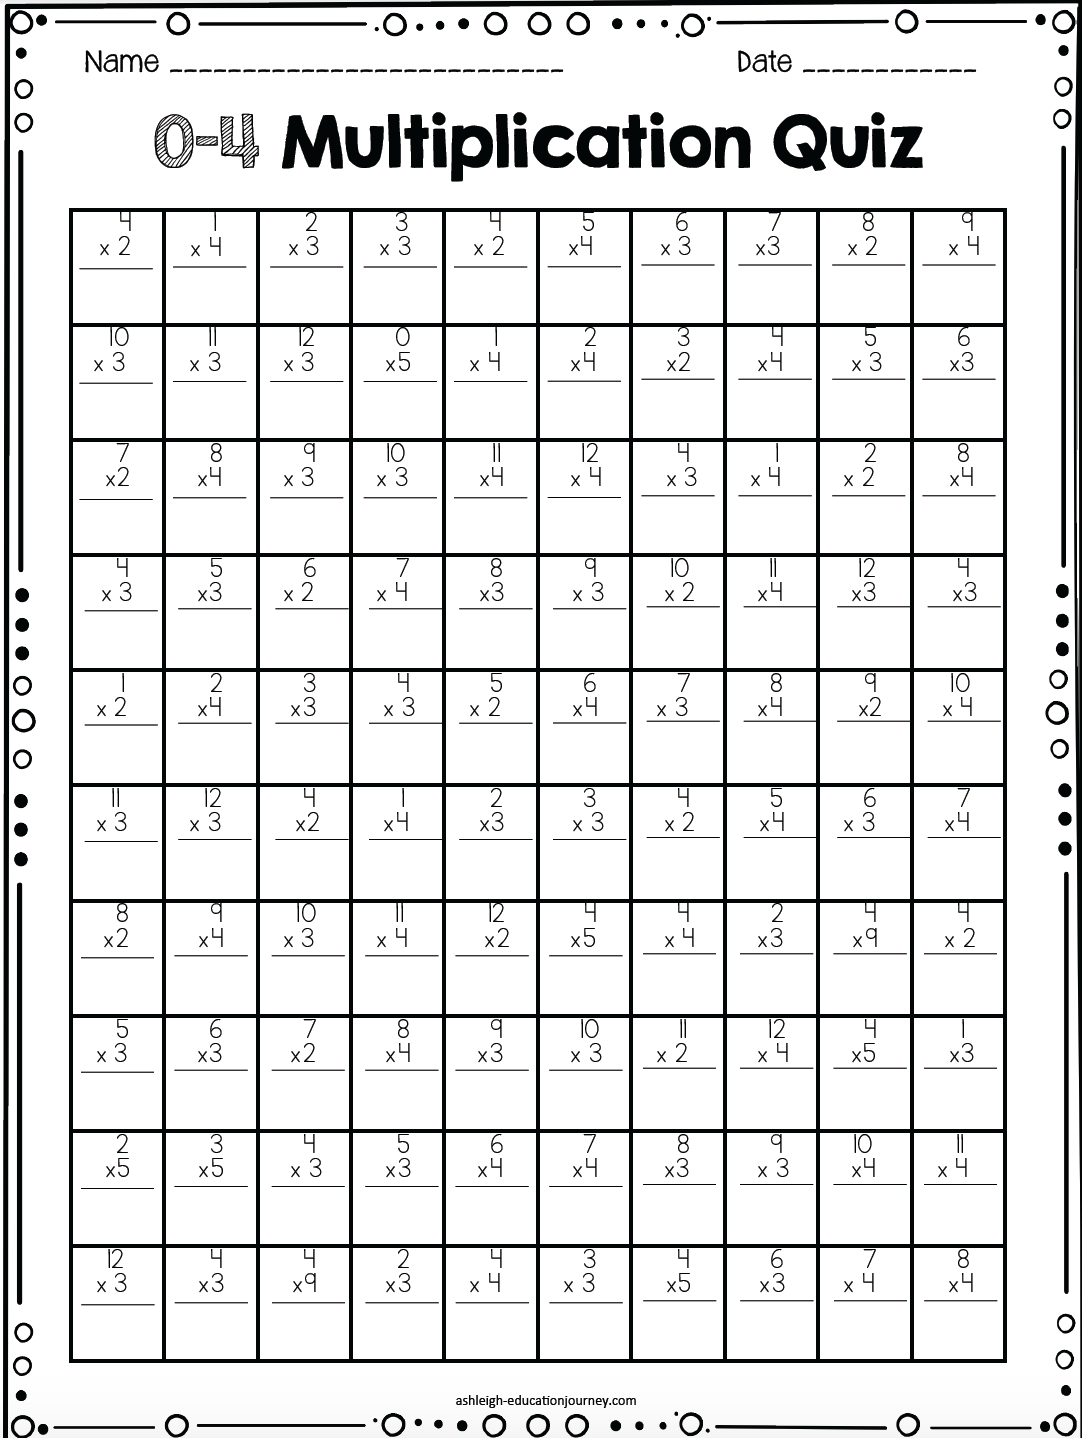 multiplication-facts-quiz-printable